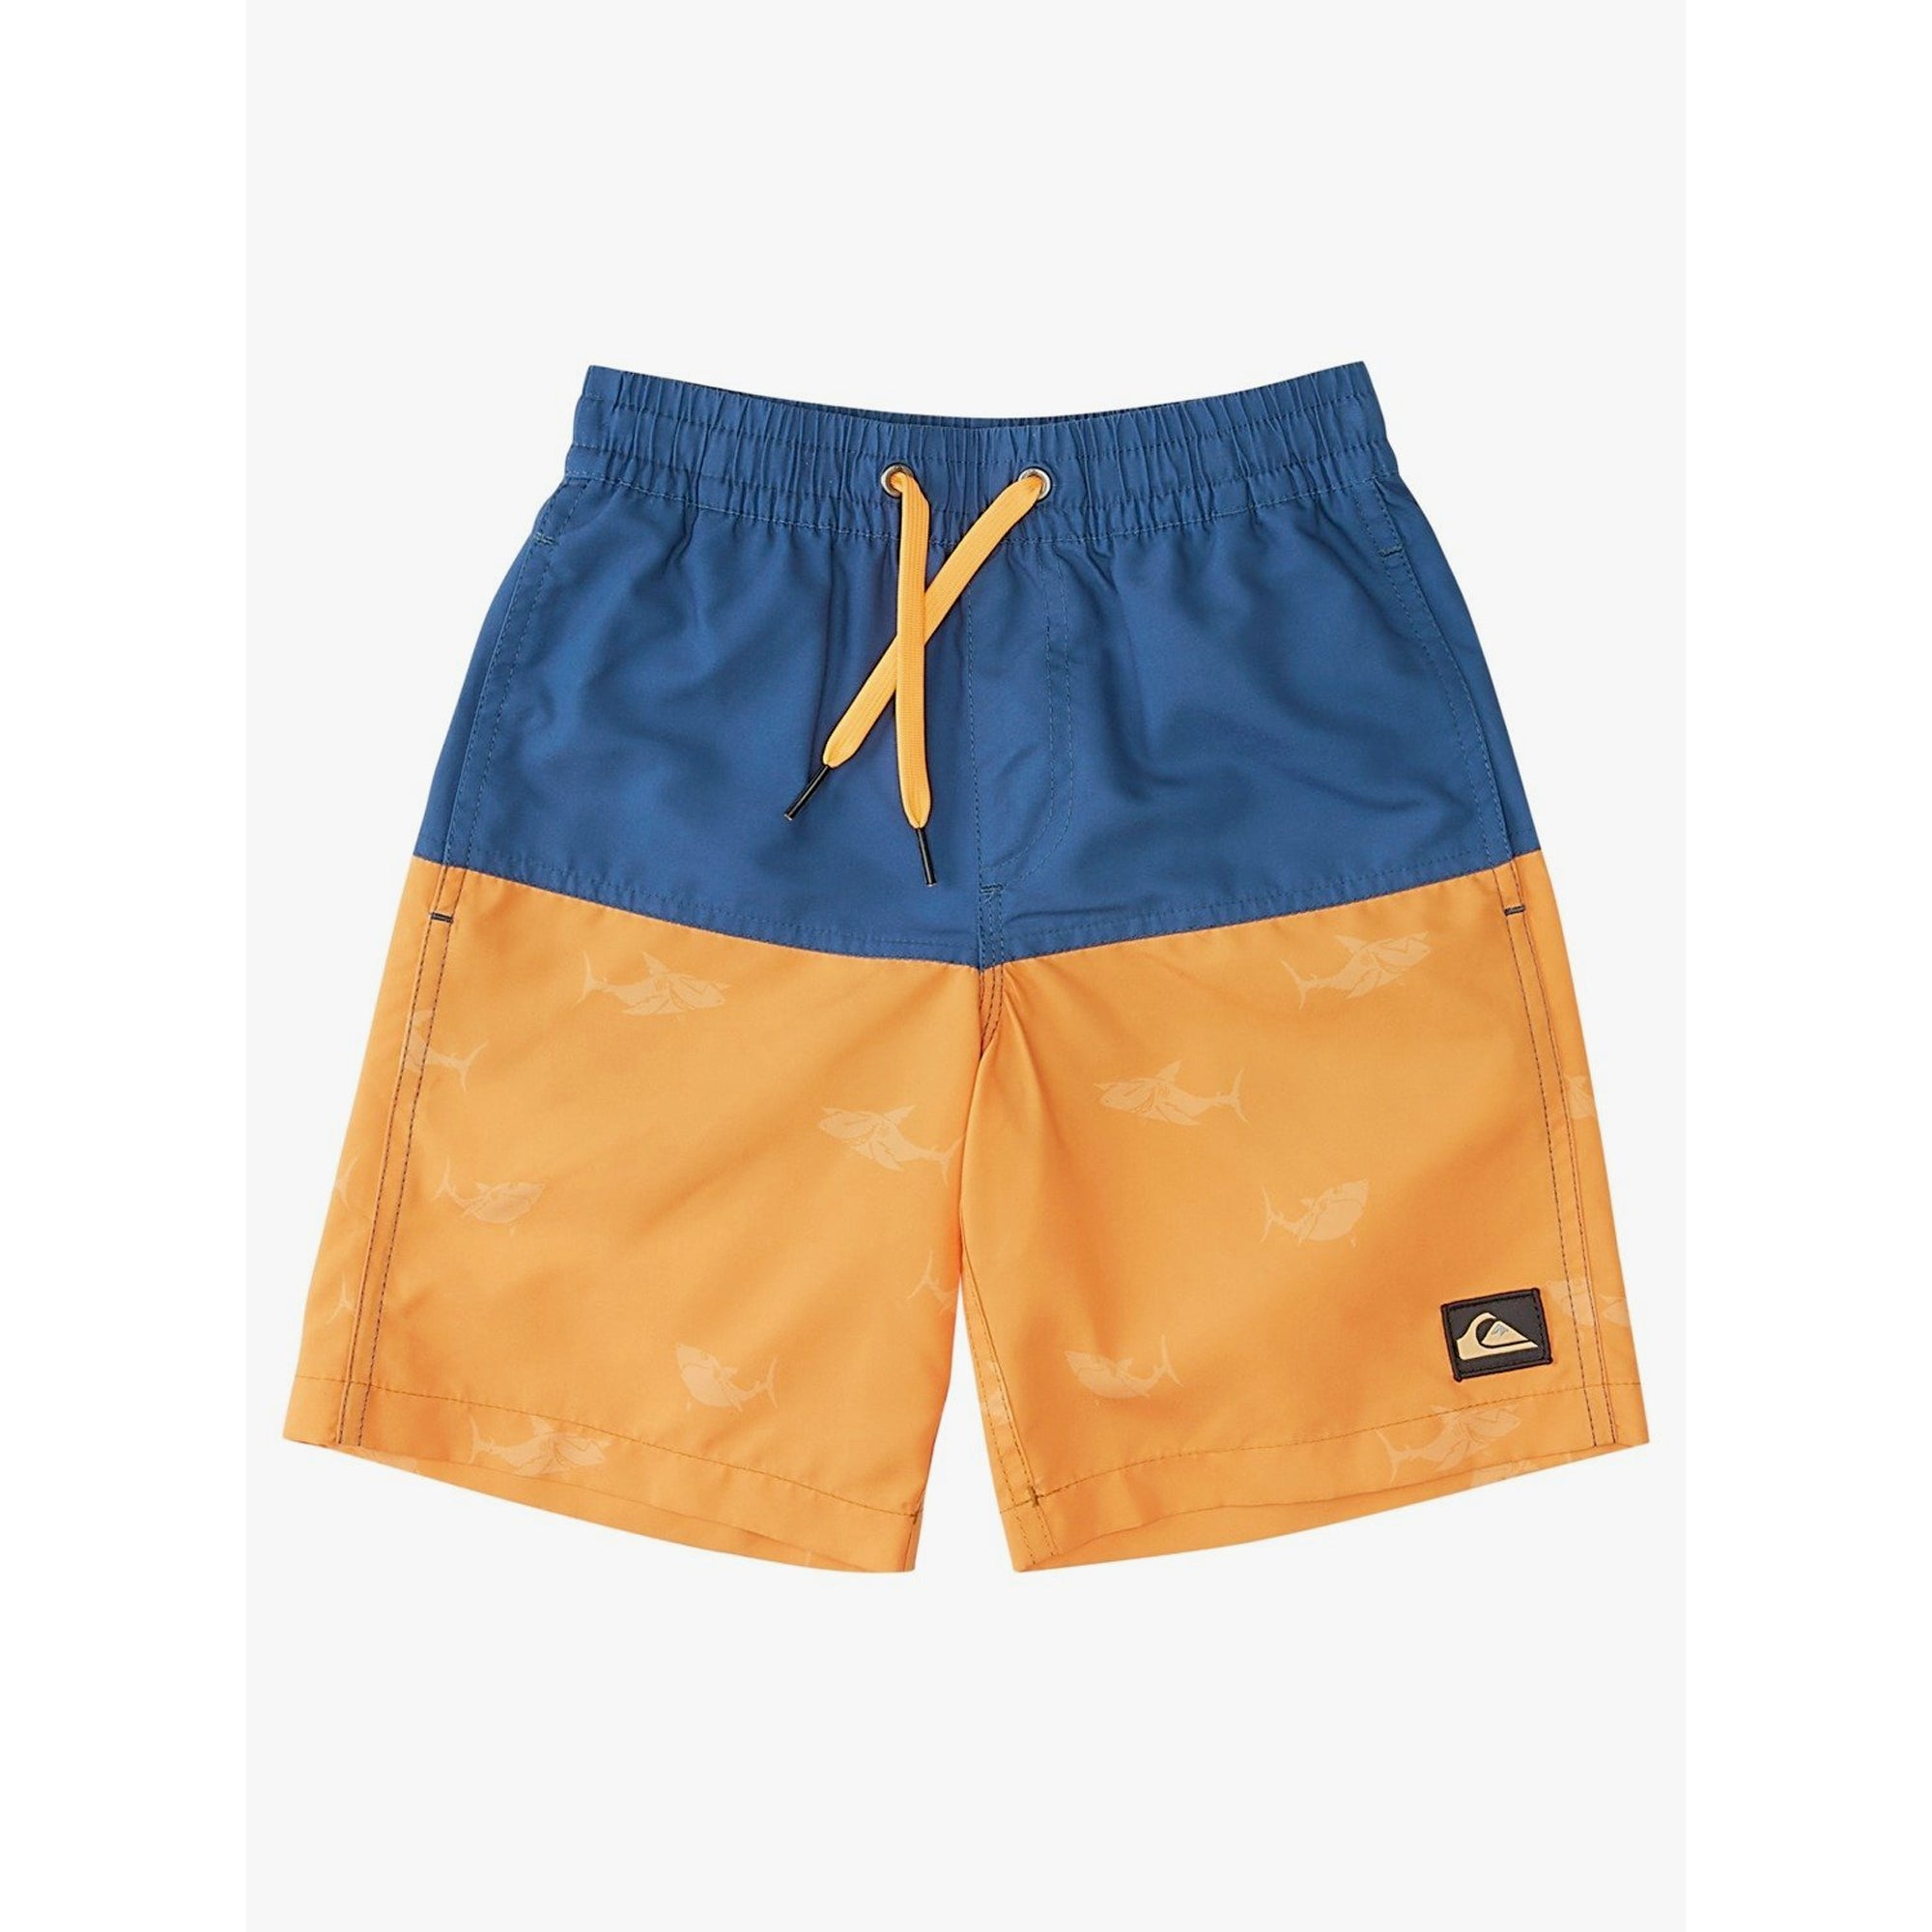 Quiksilver Magic Five 14" Volley Youth Boy's Boardshorts